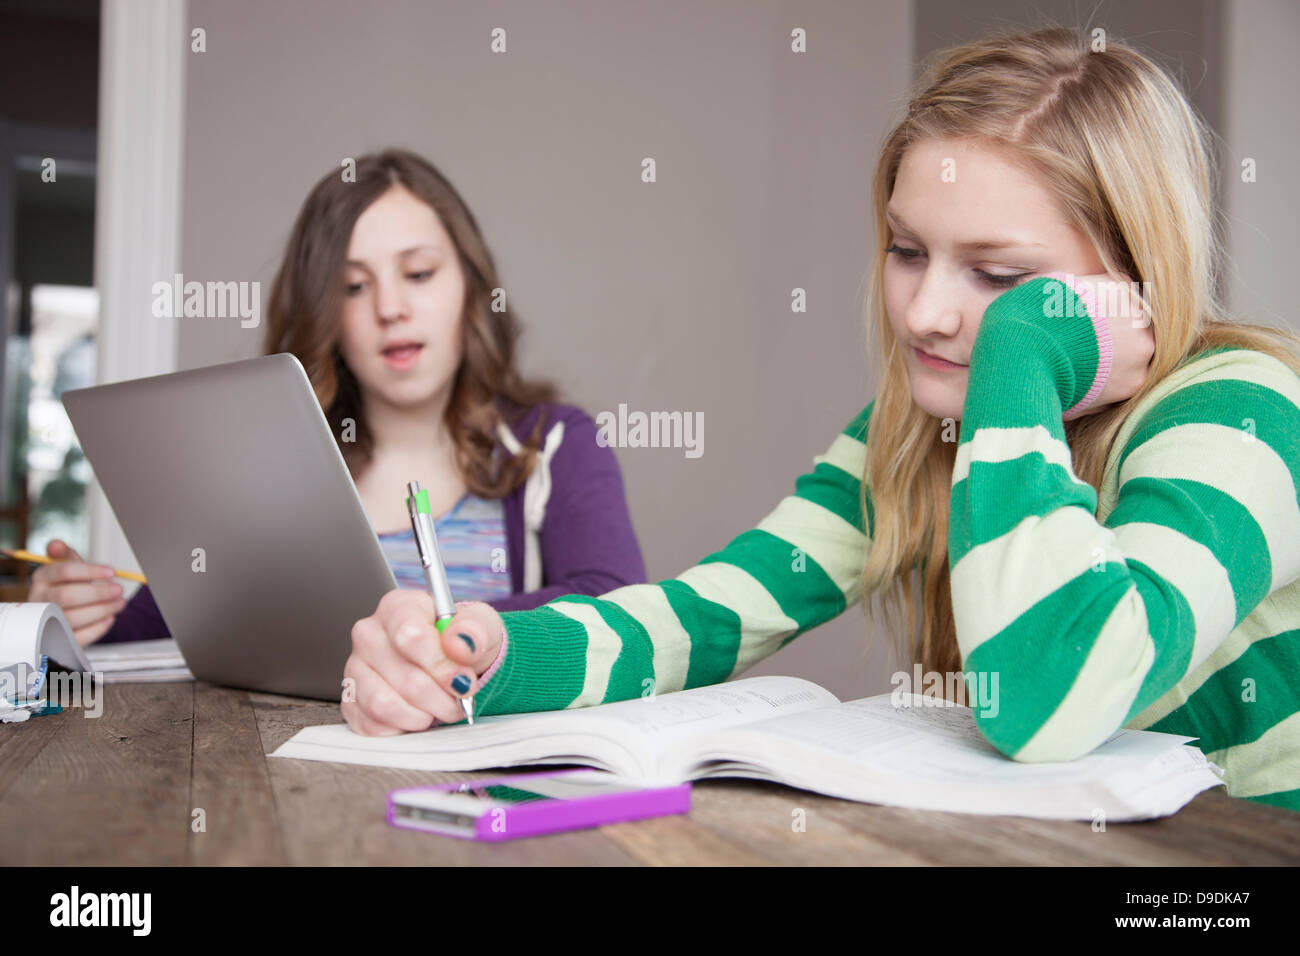 Girls sitting at table studying Stock Photo